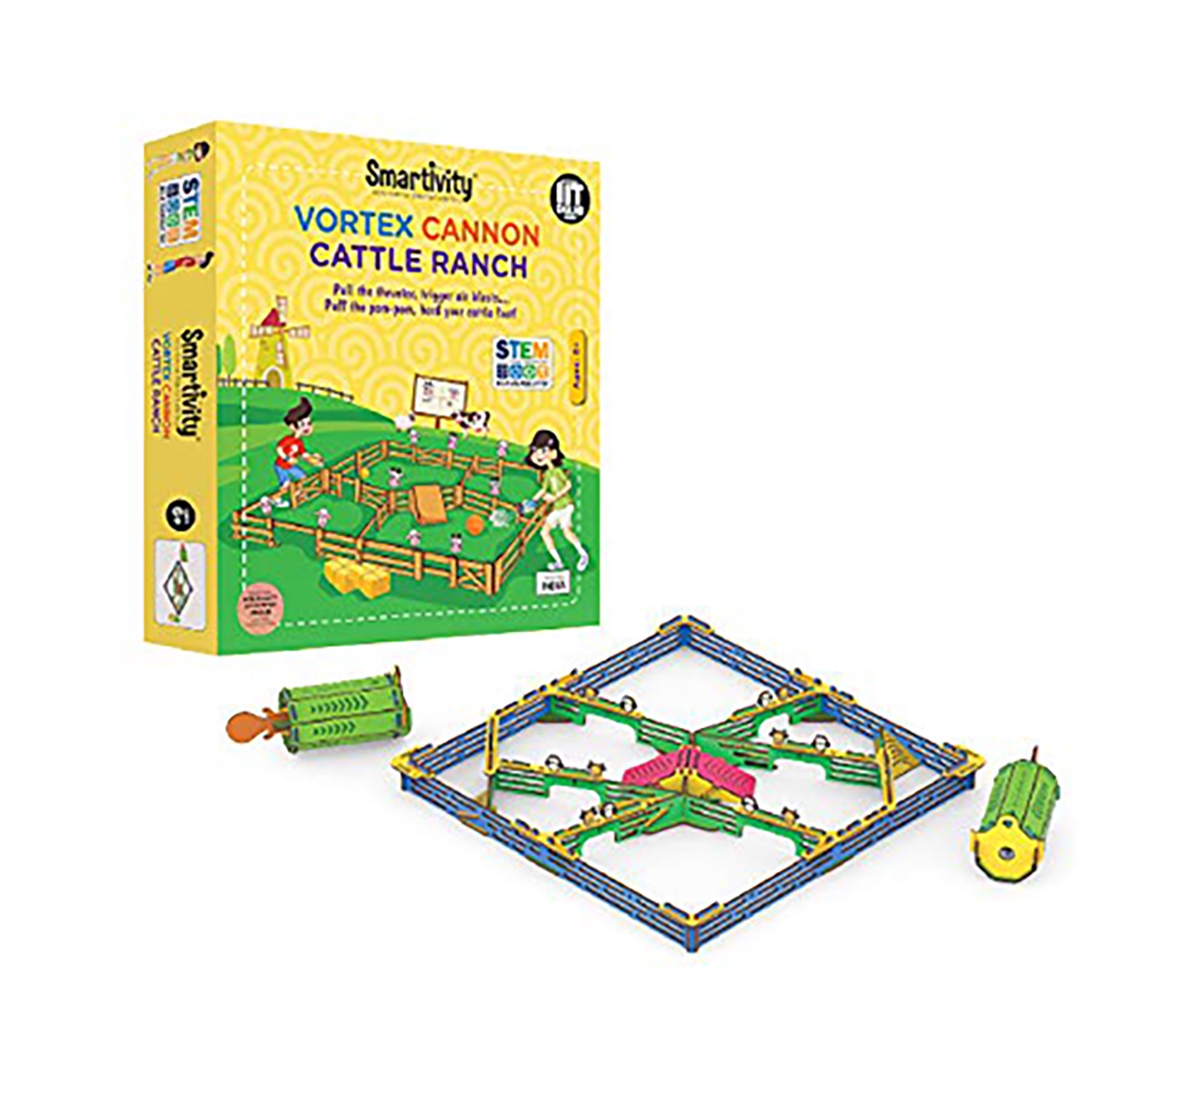 Smartivity | Smartivity Vortex Cannon Cattle Ranch: Stem, Learning, Educational and Construction Activity Toy Gift for Kids age 6Y+  0